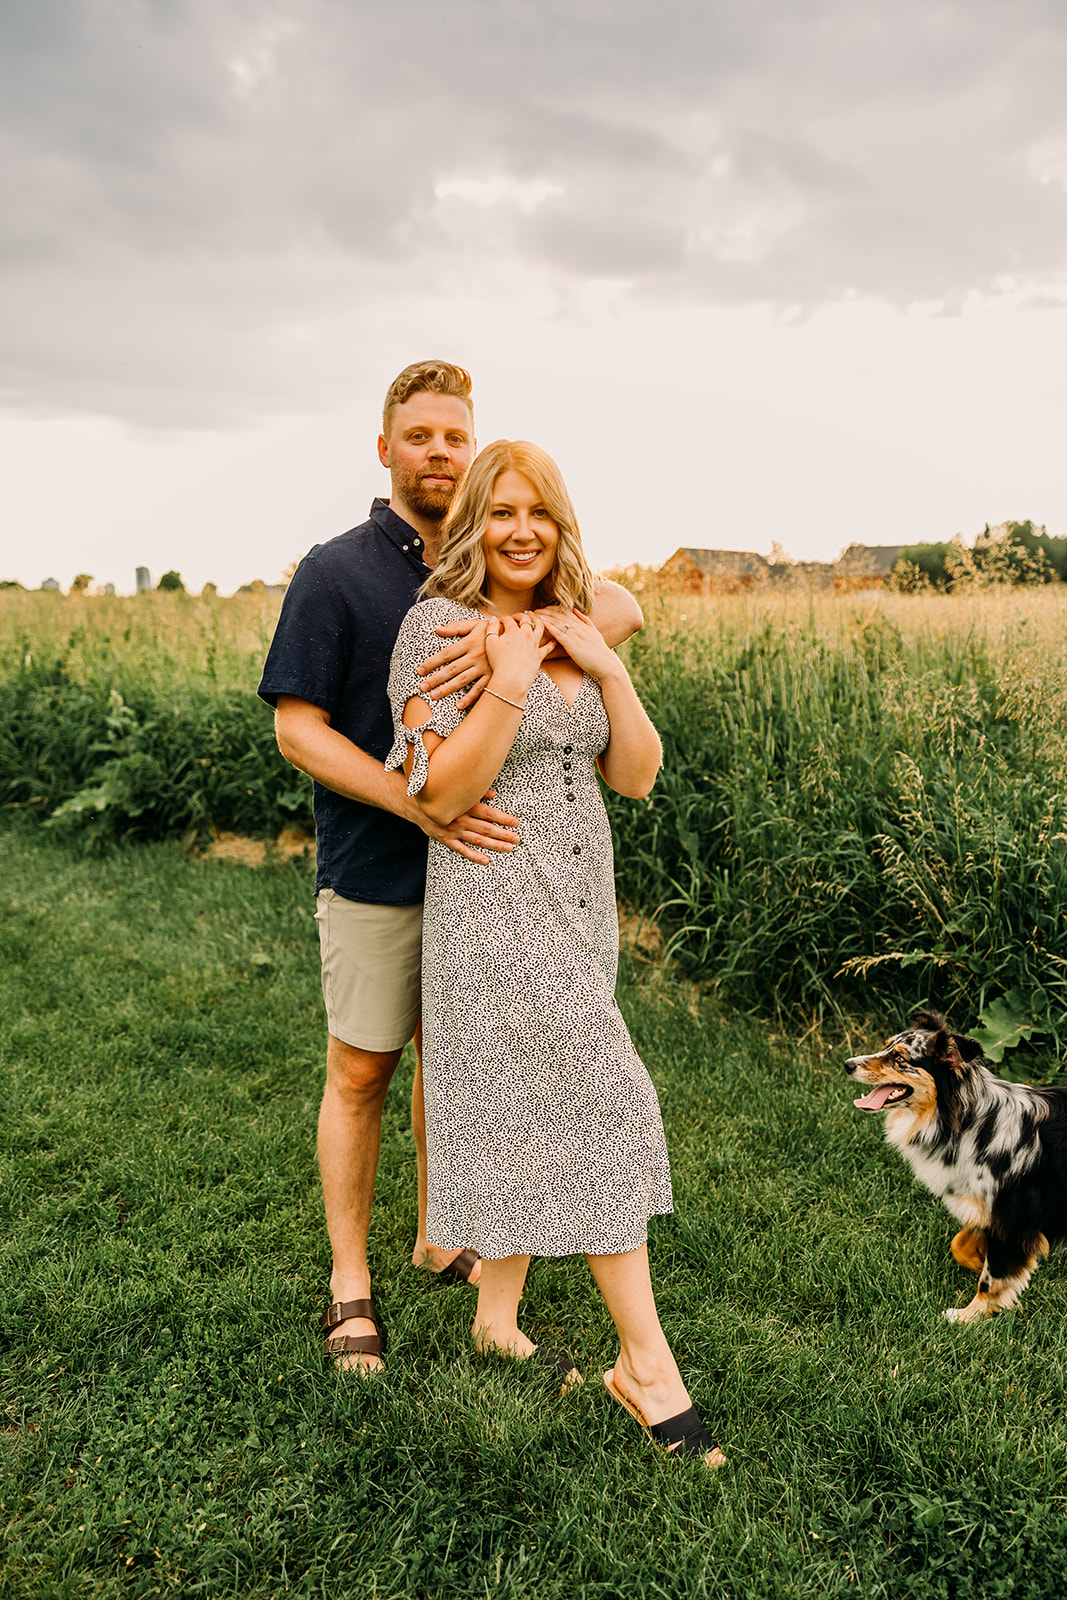 Field engagement session showcases the couple's joy and happiness